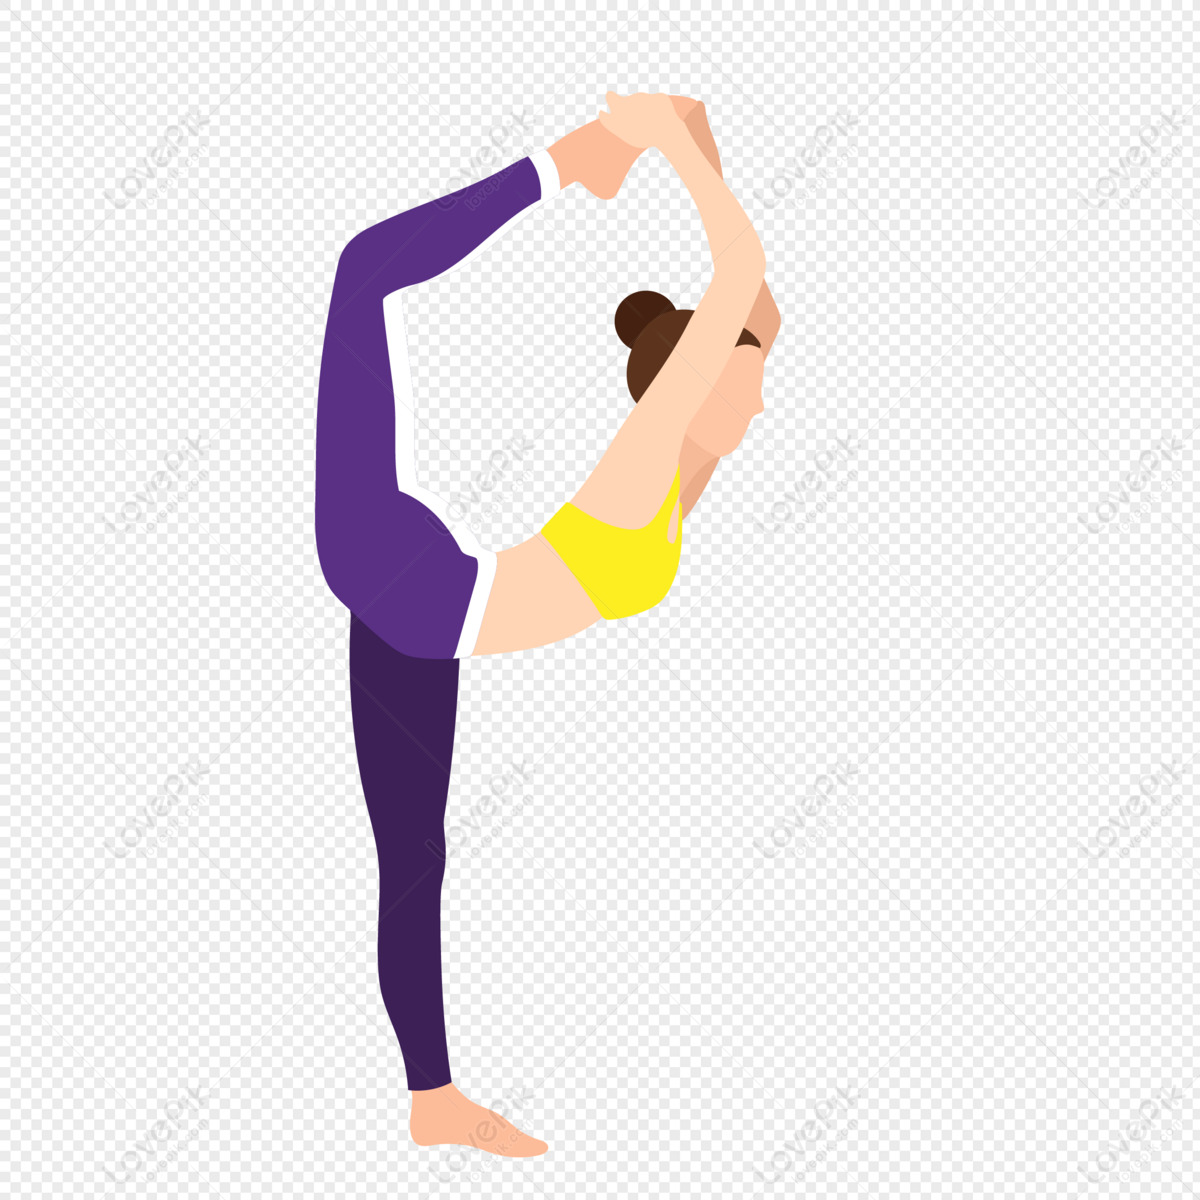 Yoga Pose Clipart Transparent PNG Hd, Yoga Pose With Pink Wear, Yoga Day,  International, Yoga PNG Image For Free Download